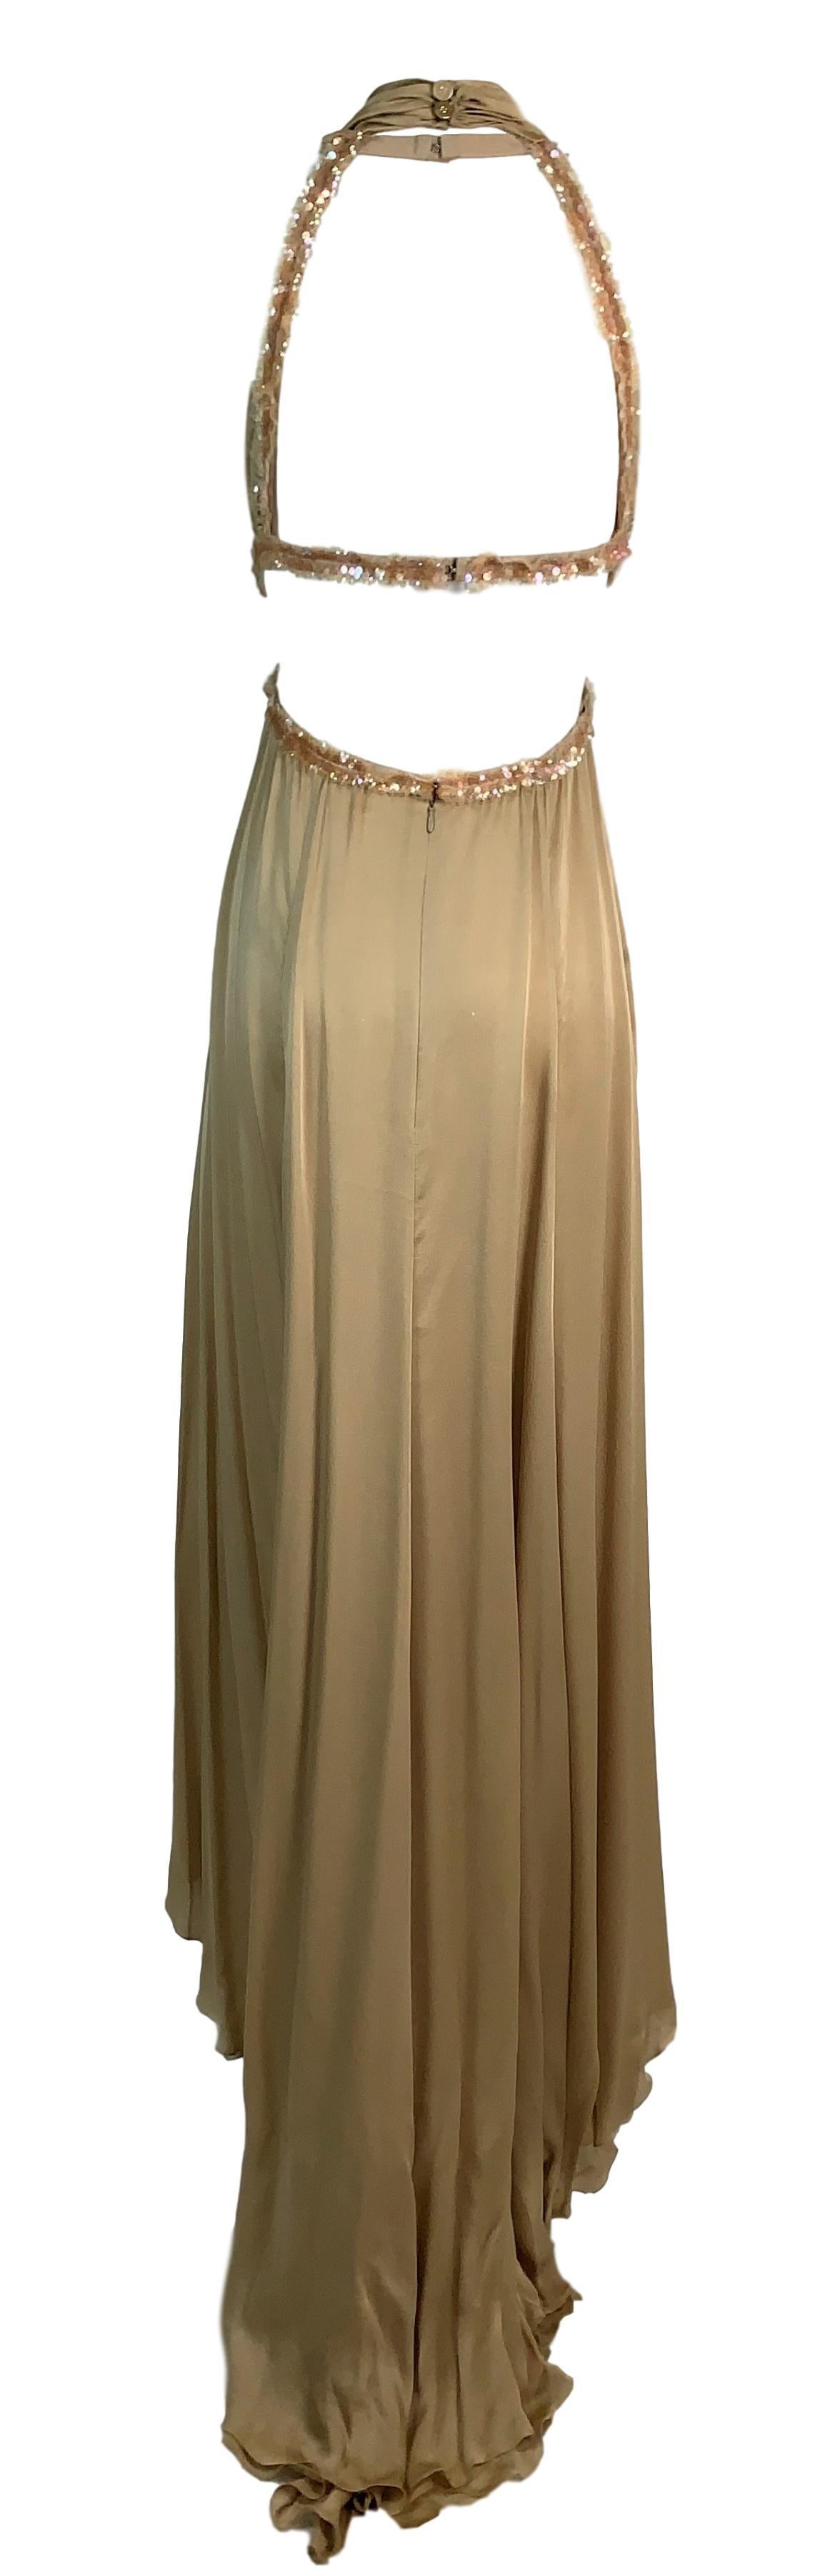 S/S 2003 Chanel Nude Silk Cut-Out Plunging Embellished Gown Dress